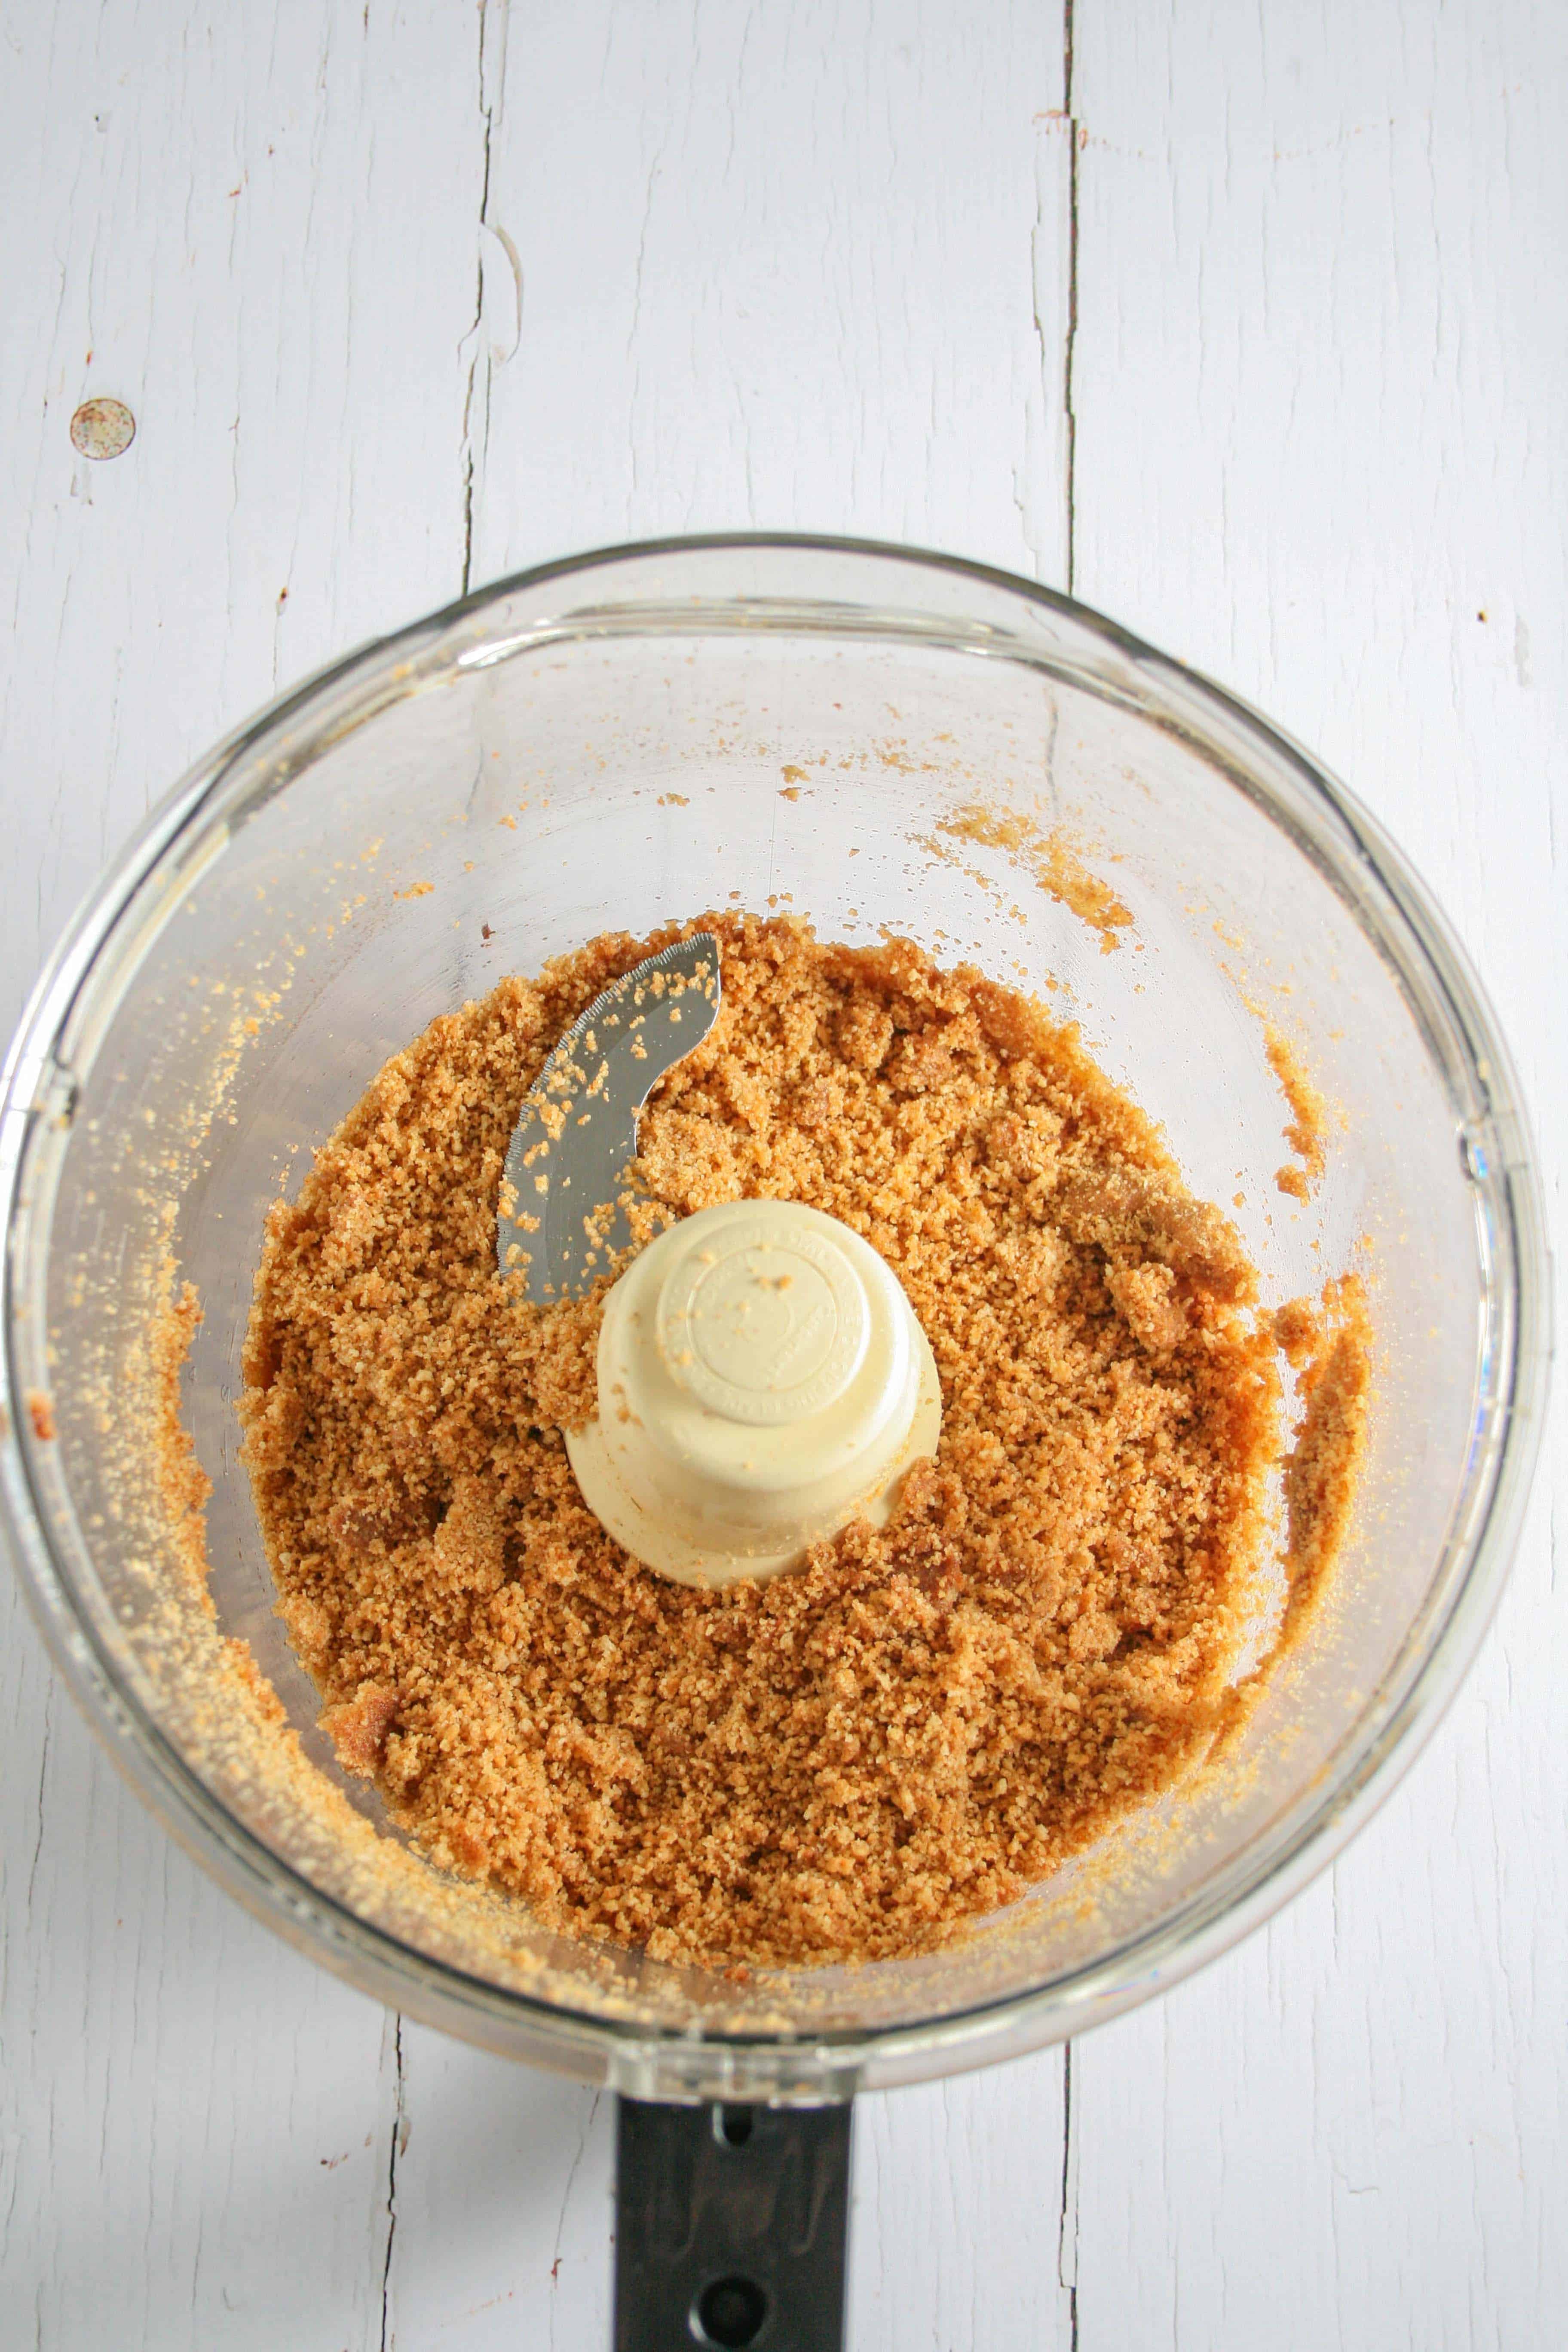 Photograph of graham crackers being ground in a food processor to make a crust